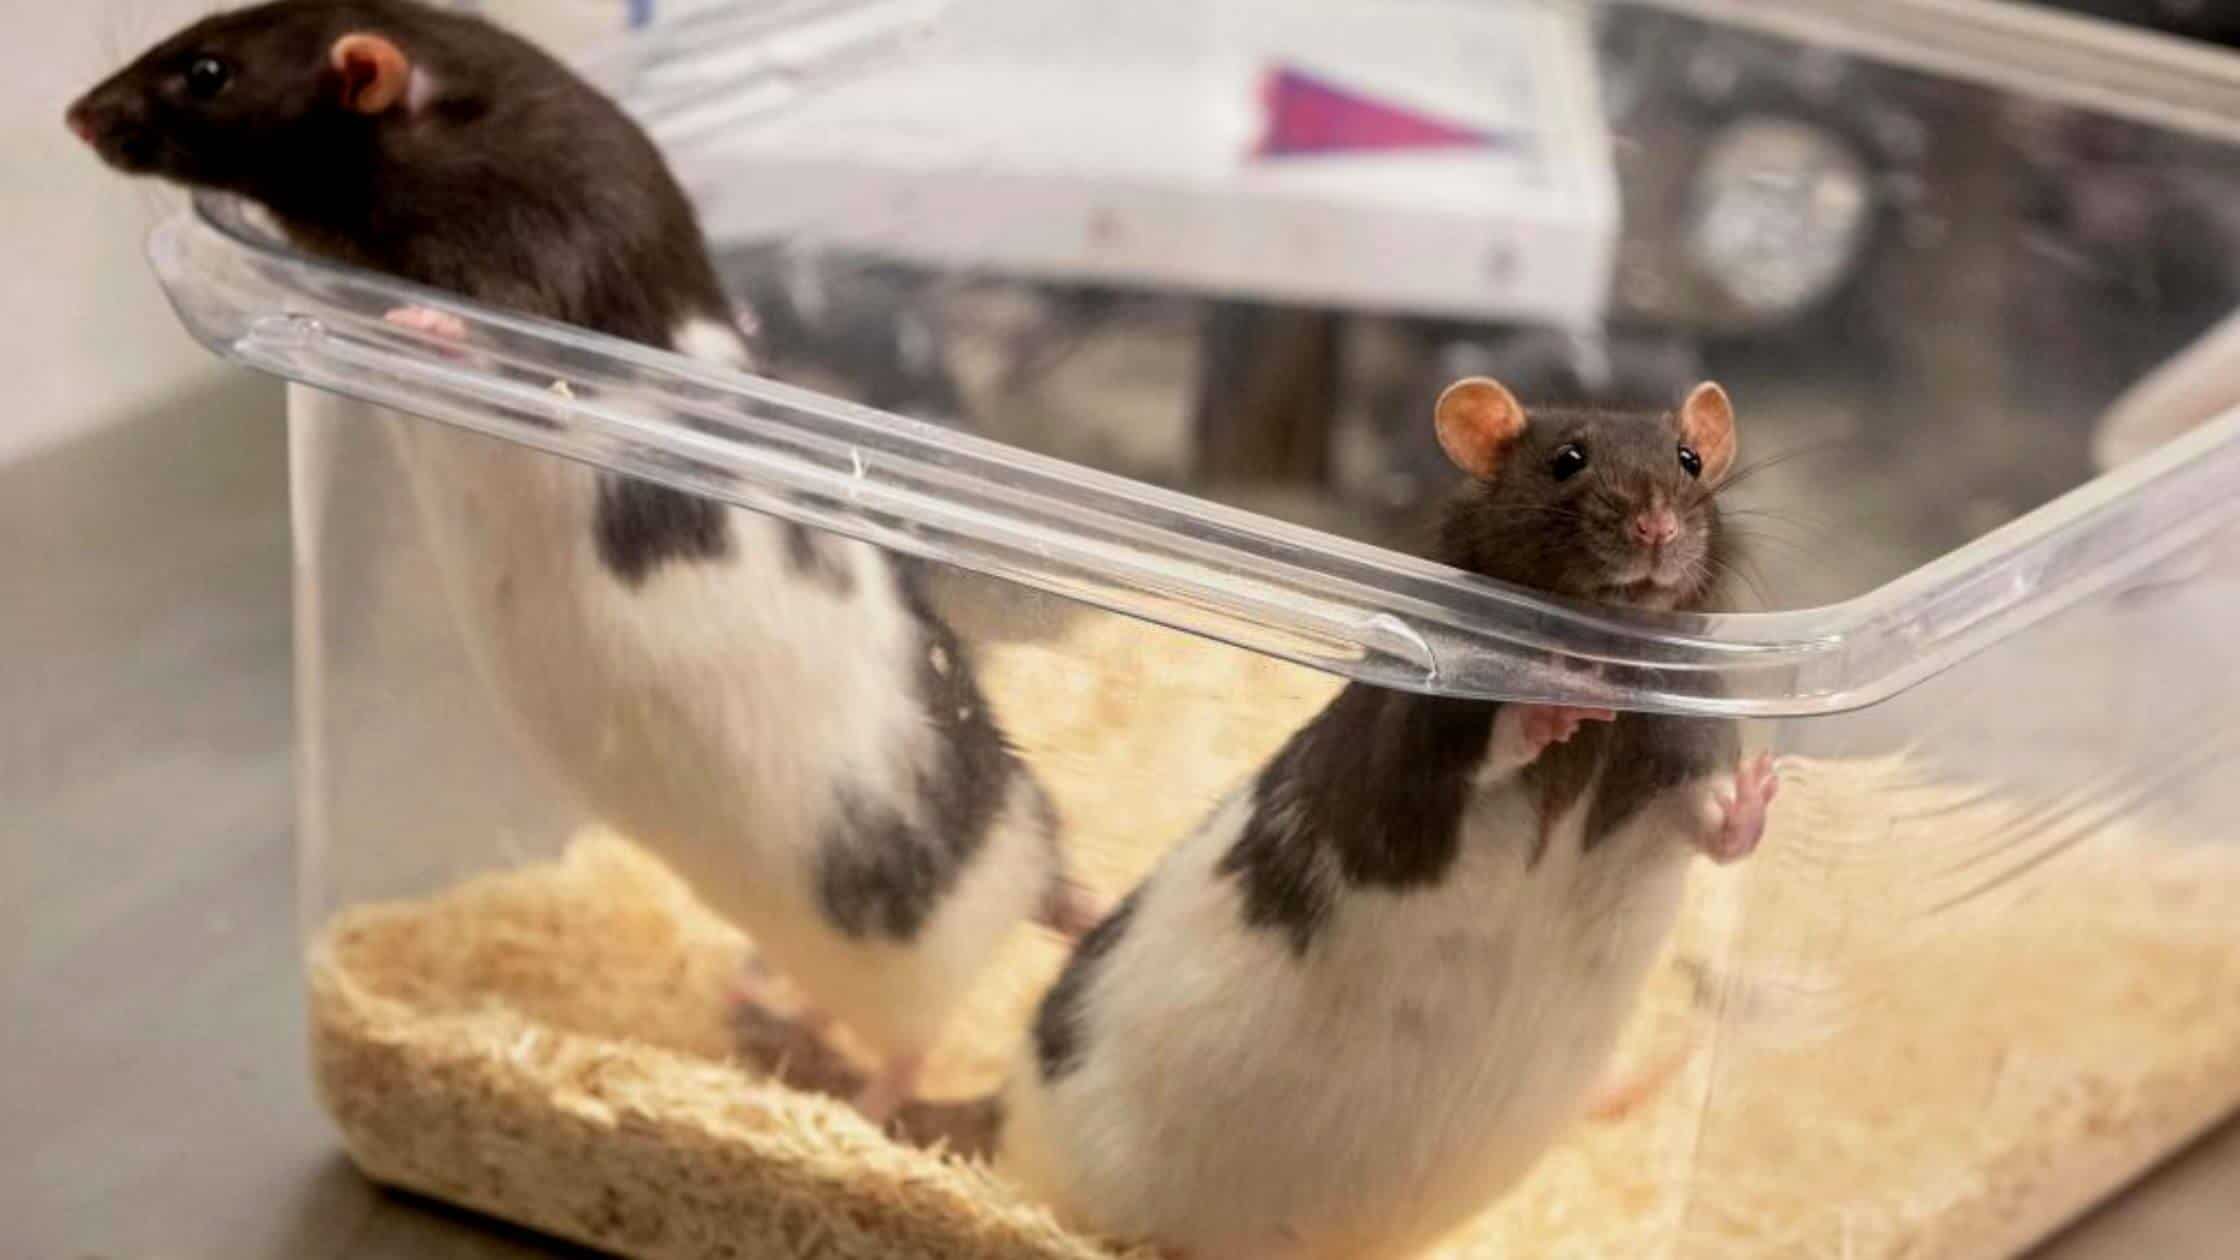 Human Brain Cells In A Rat's Brain May Provide Insight Into Autism And ADHD